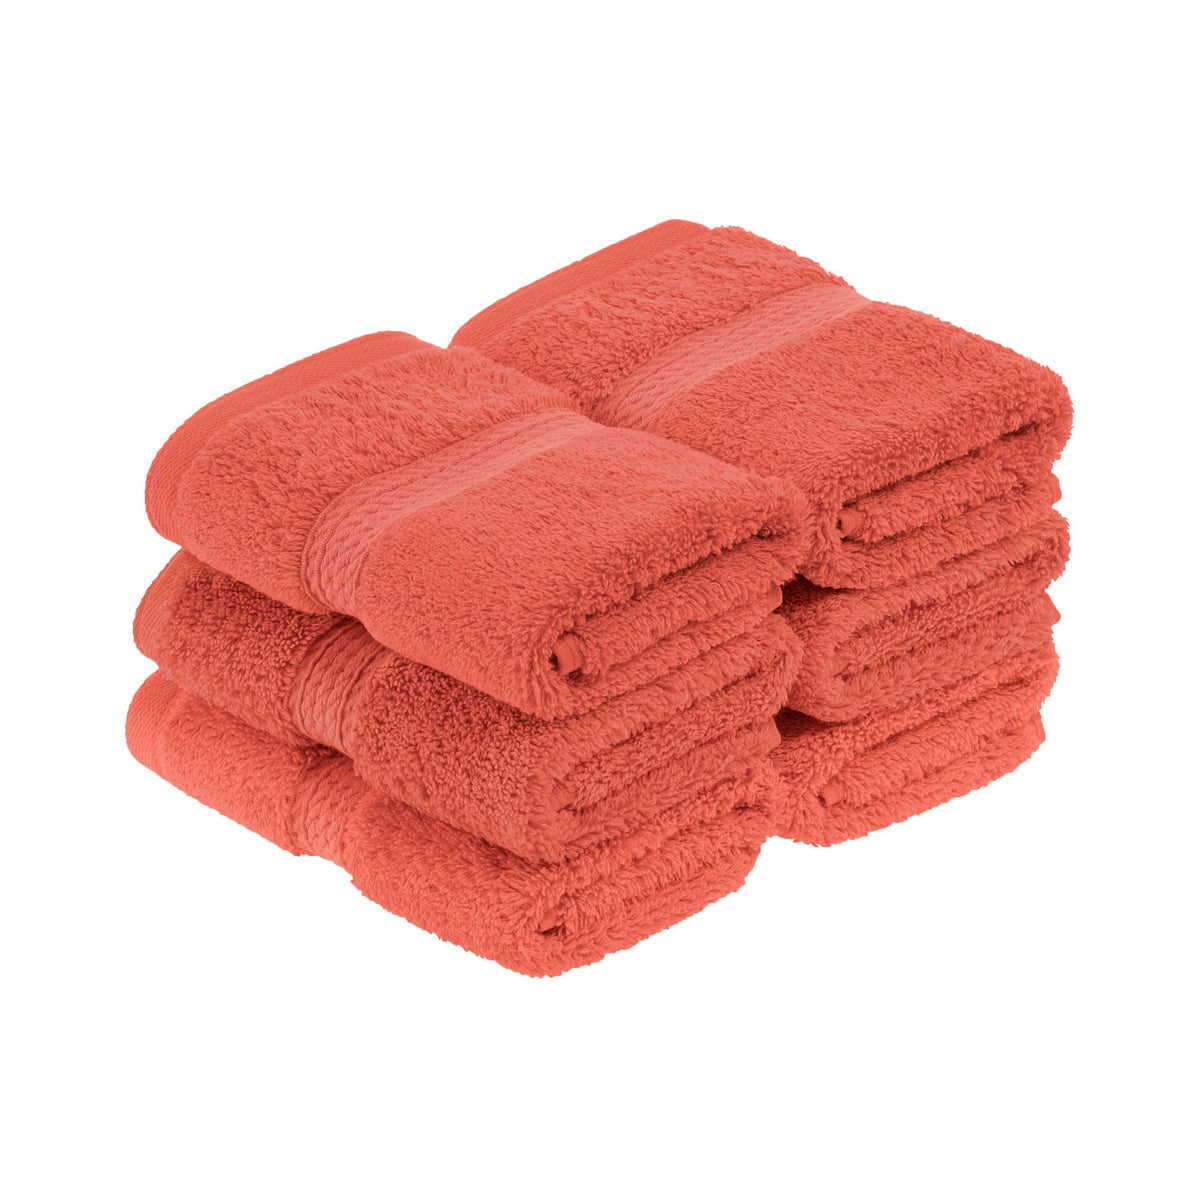 Egyptian Cotton Heavyweight 6 Piece Face Towel/ Washcloth Set - Coral